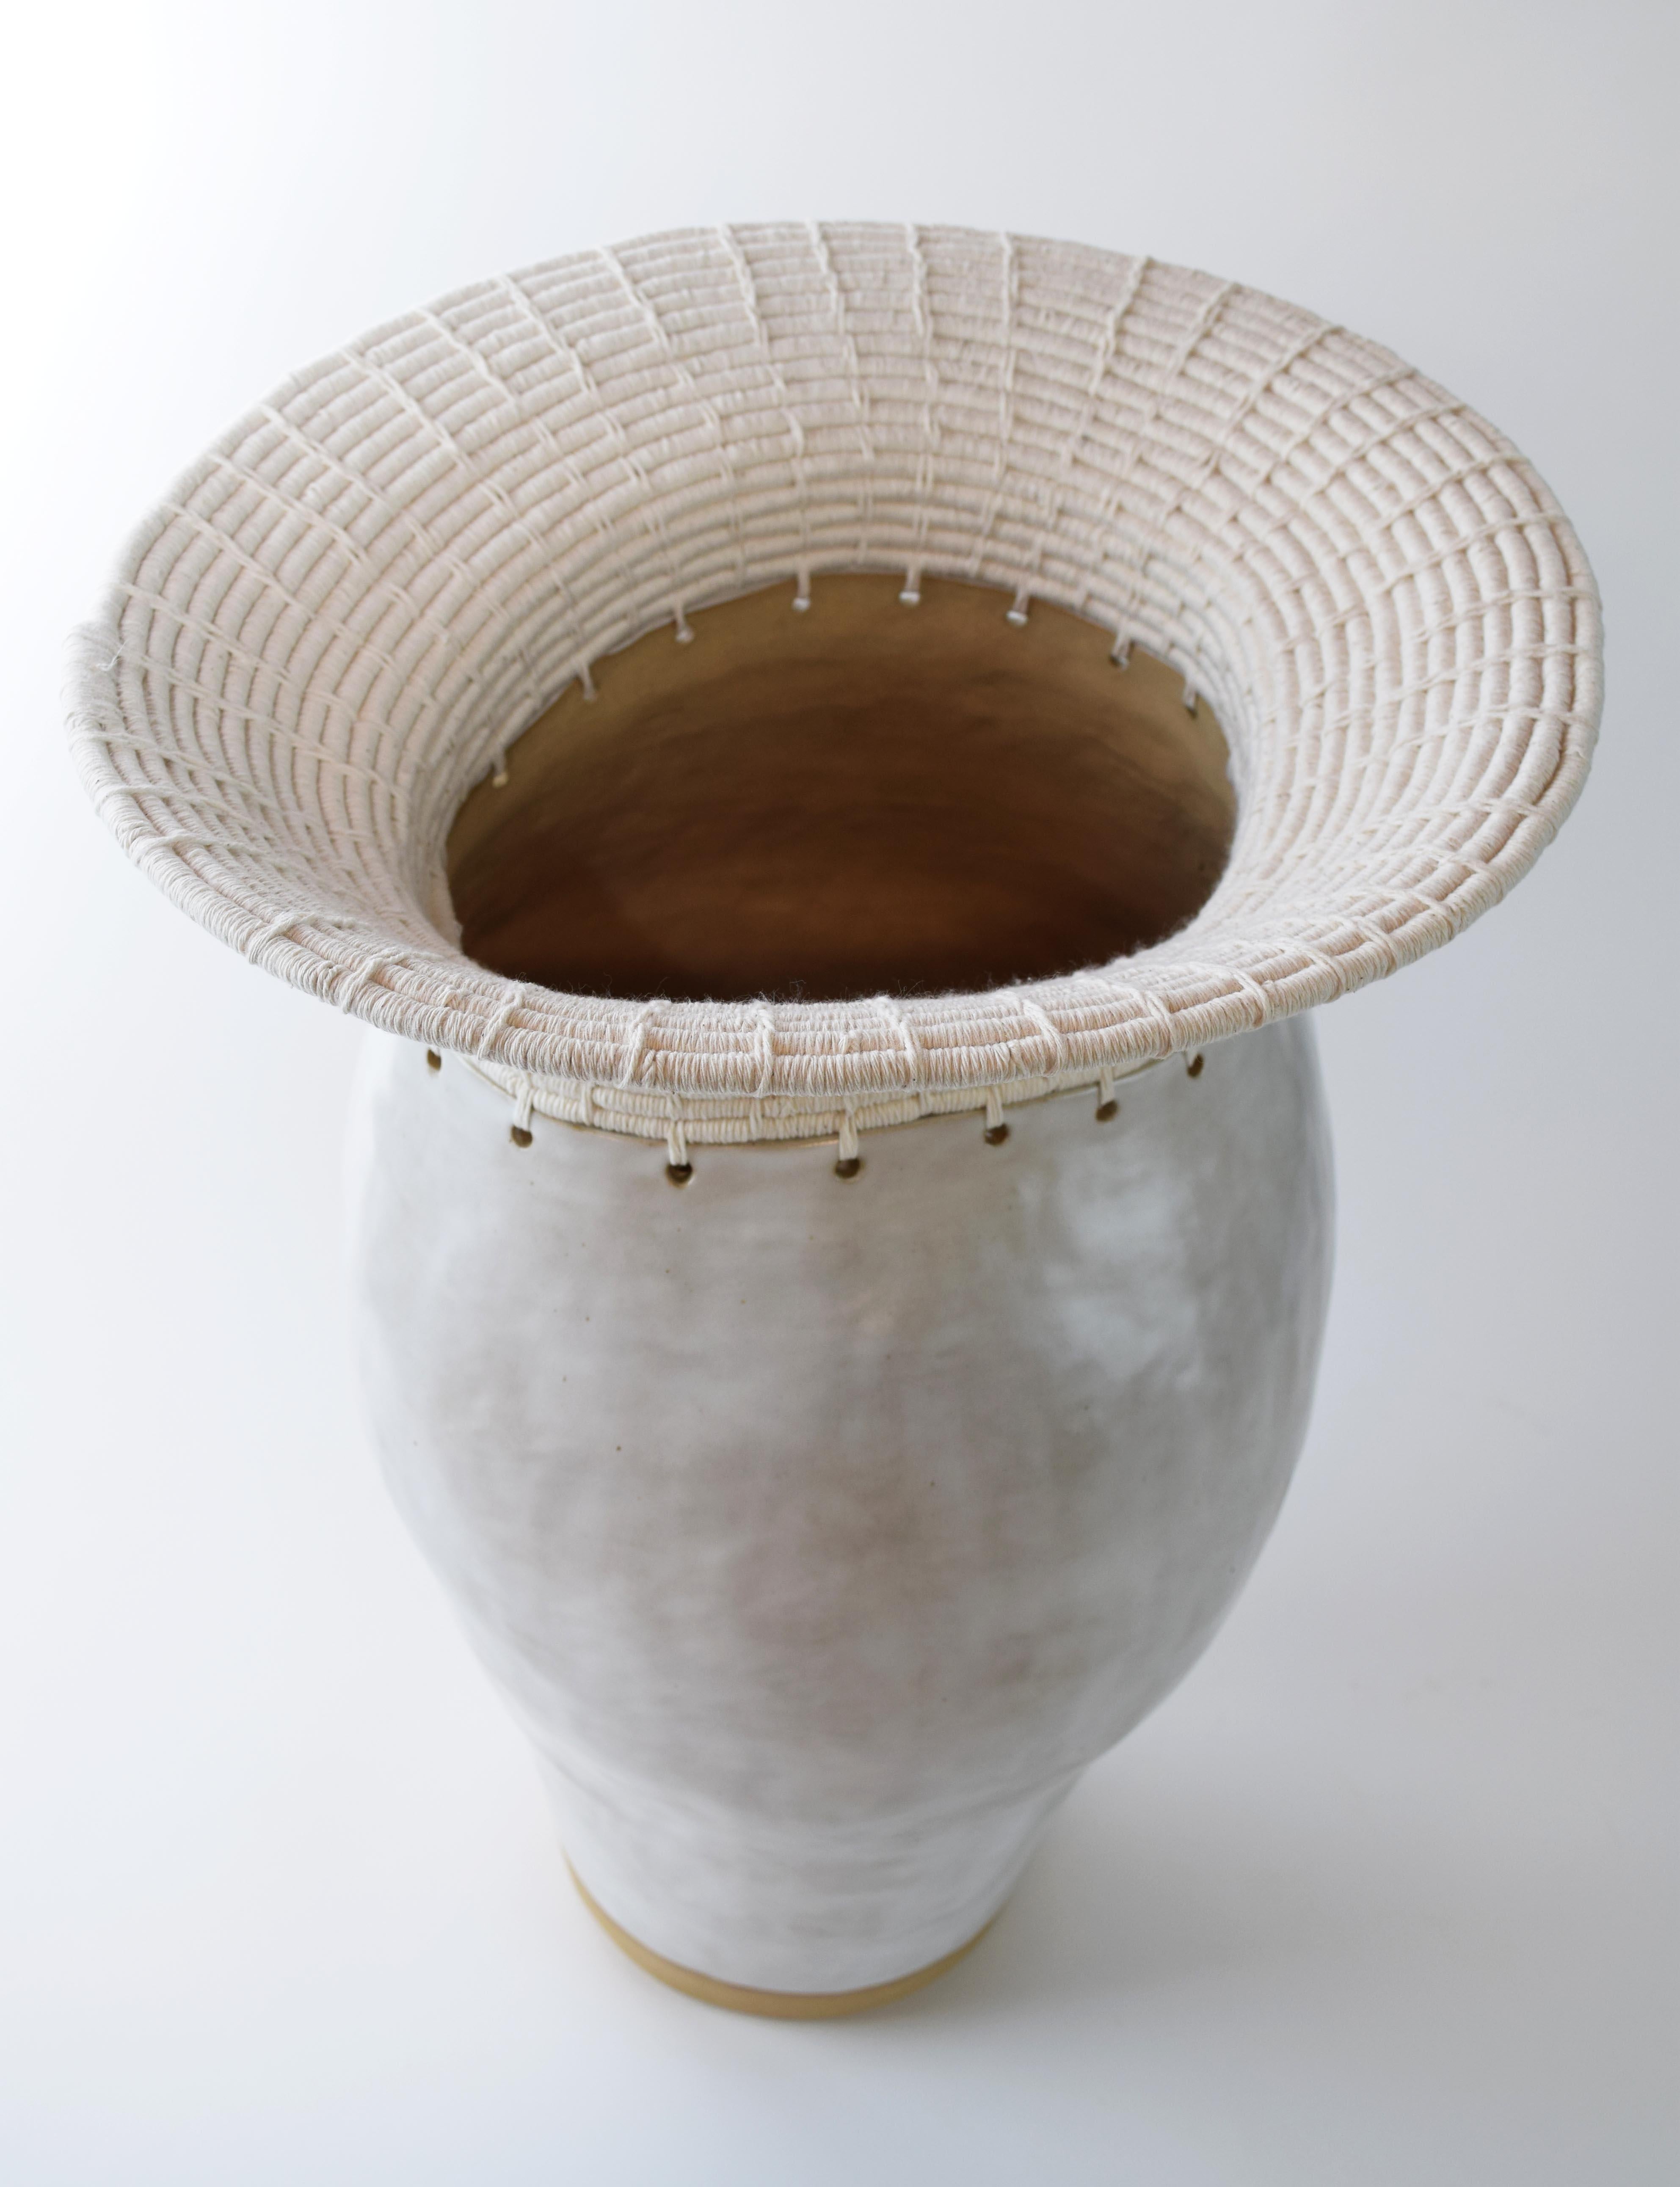 Hand-Crafted One of a Kind Asymmetrical Ceramic Vessel #771, White Glaze and Woven Cotton For Sale